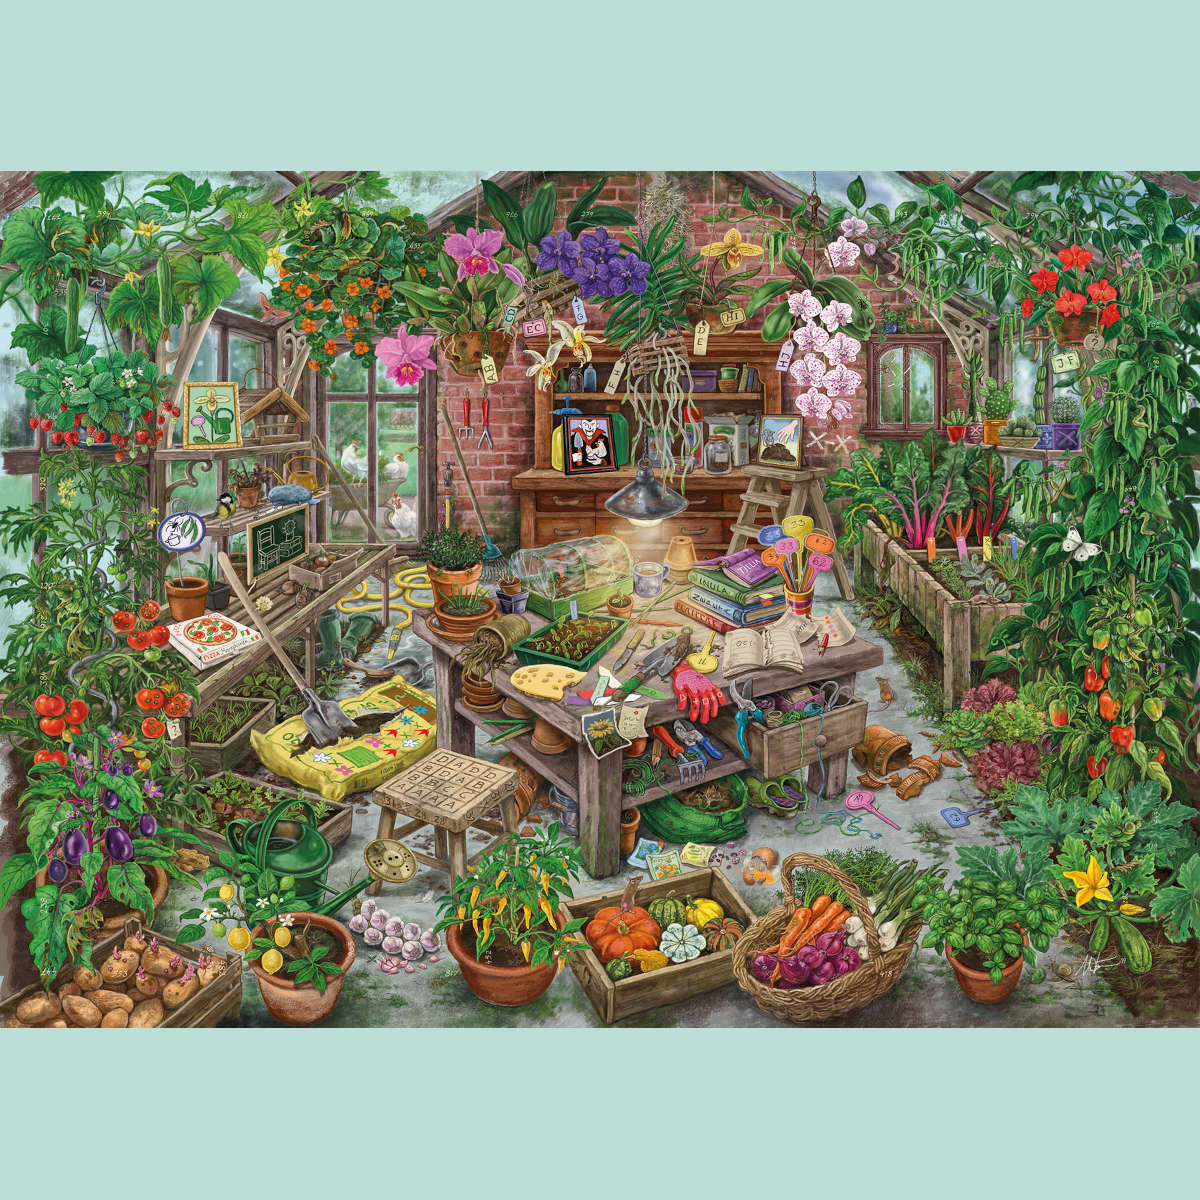 Escape Puzzle: The Cursed Greenhouse 368pc Jigsaw